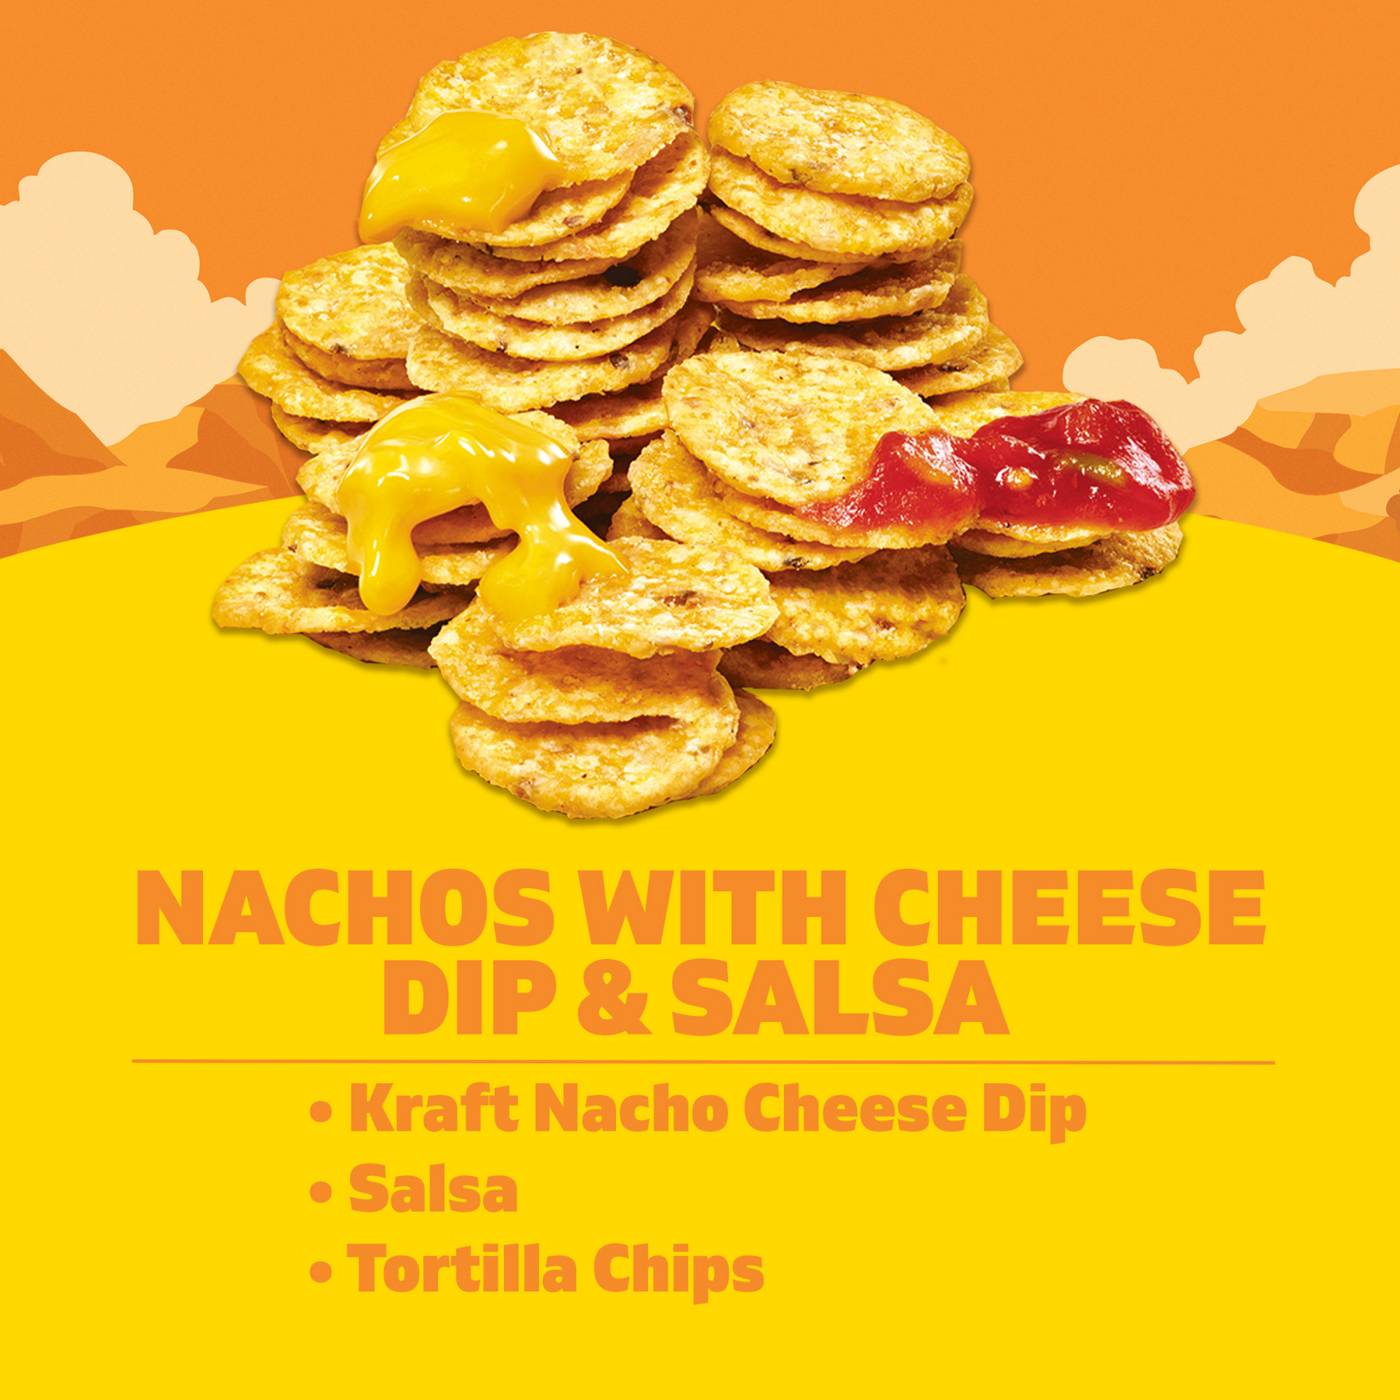 Lunchables Snack Kit Tray - Nachos with Cheese Dip & Salsa; image 3 of 3